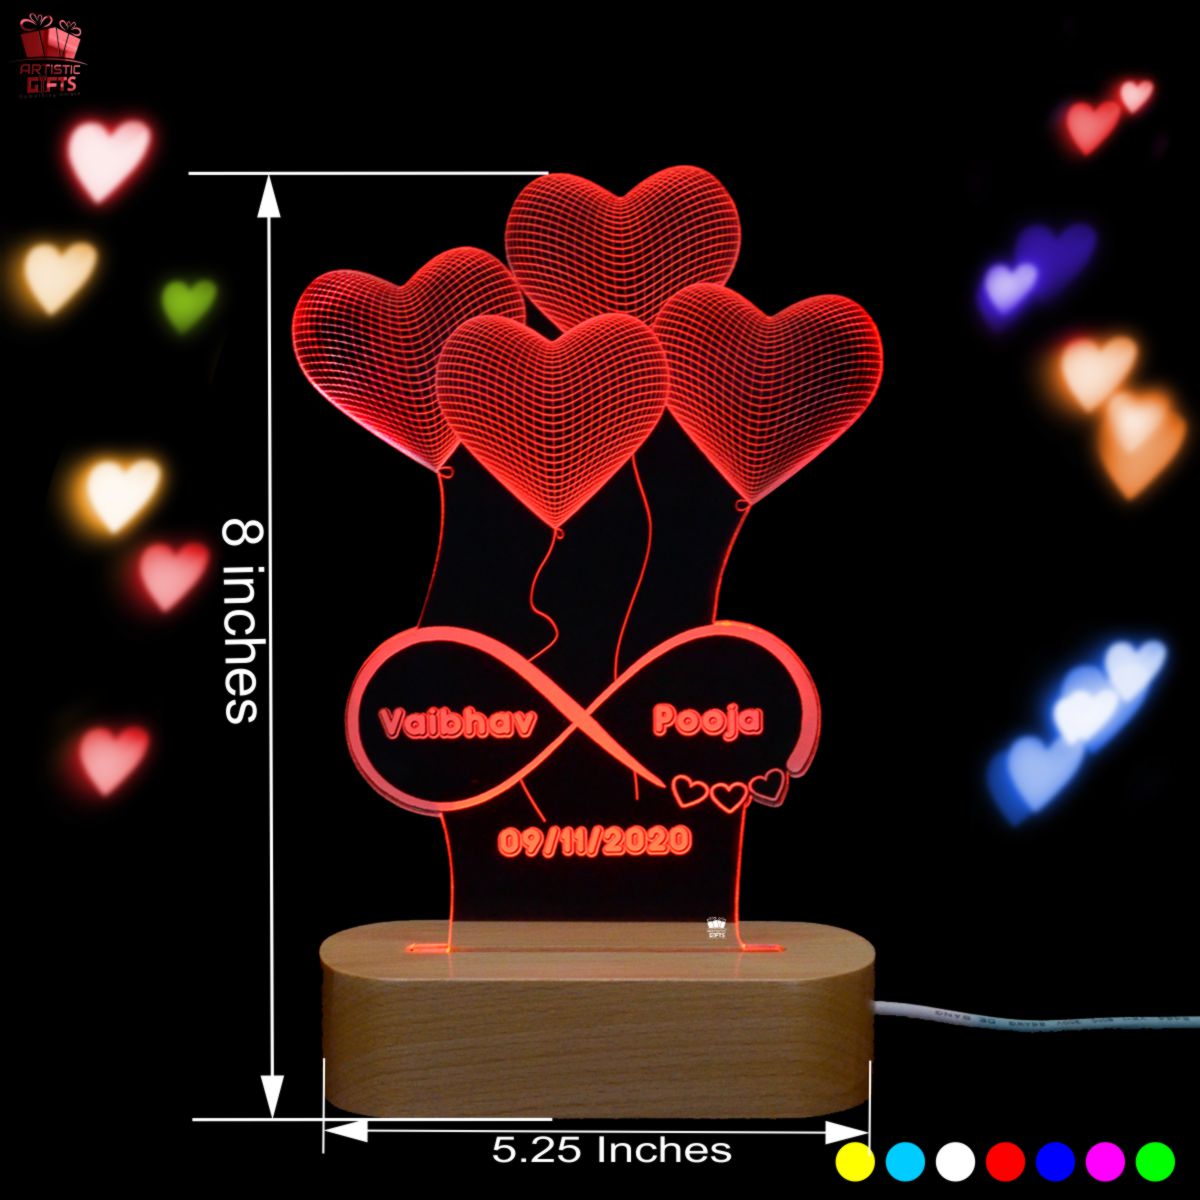 Personalized 3D illusion Multi-Color LED Lamp Infinity Love Design